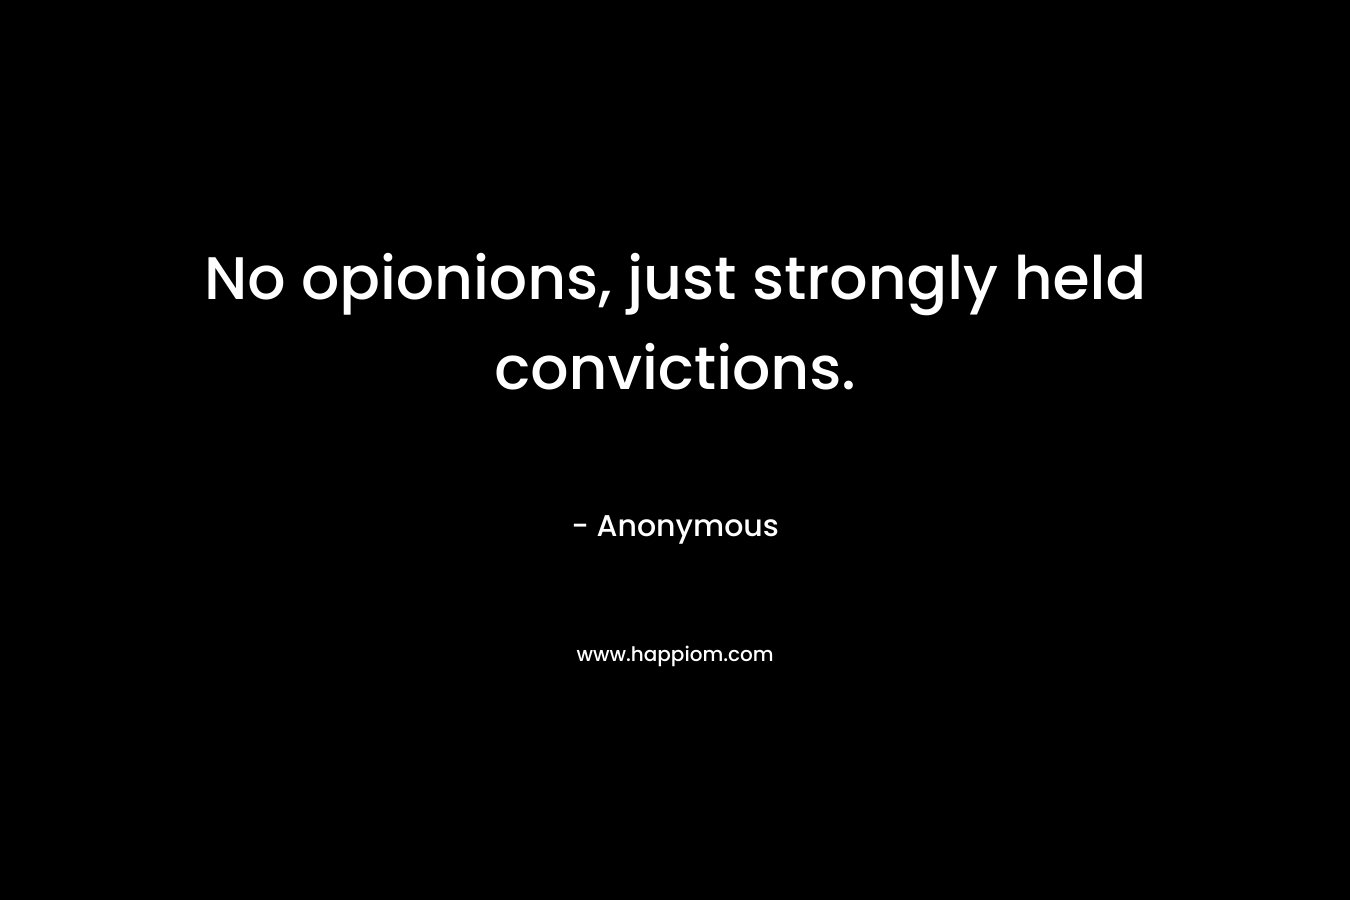 No opionions, just strongly held convictions.